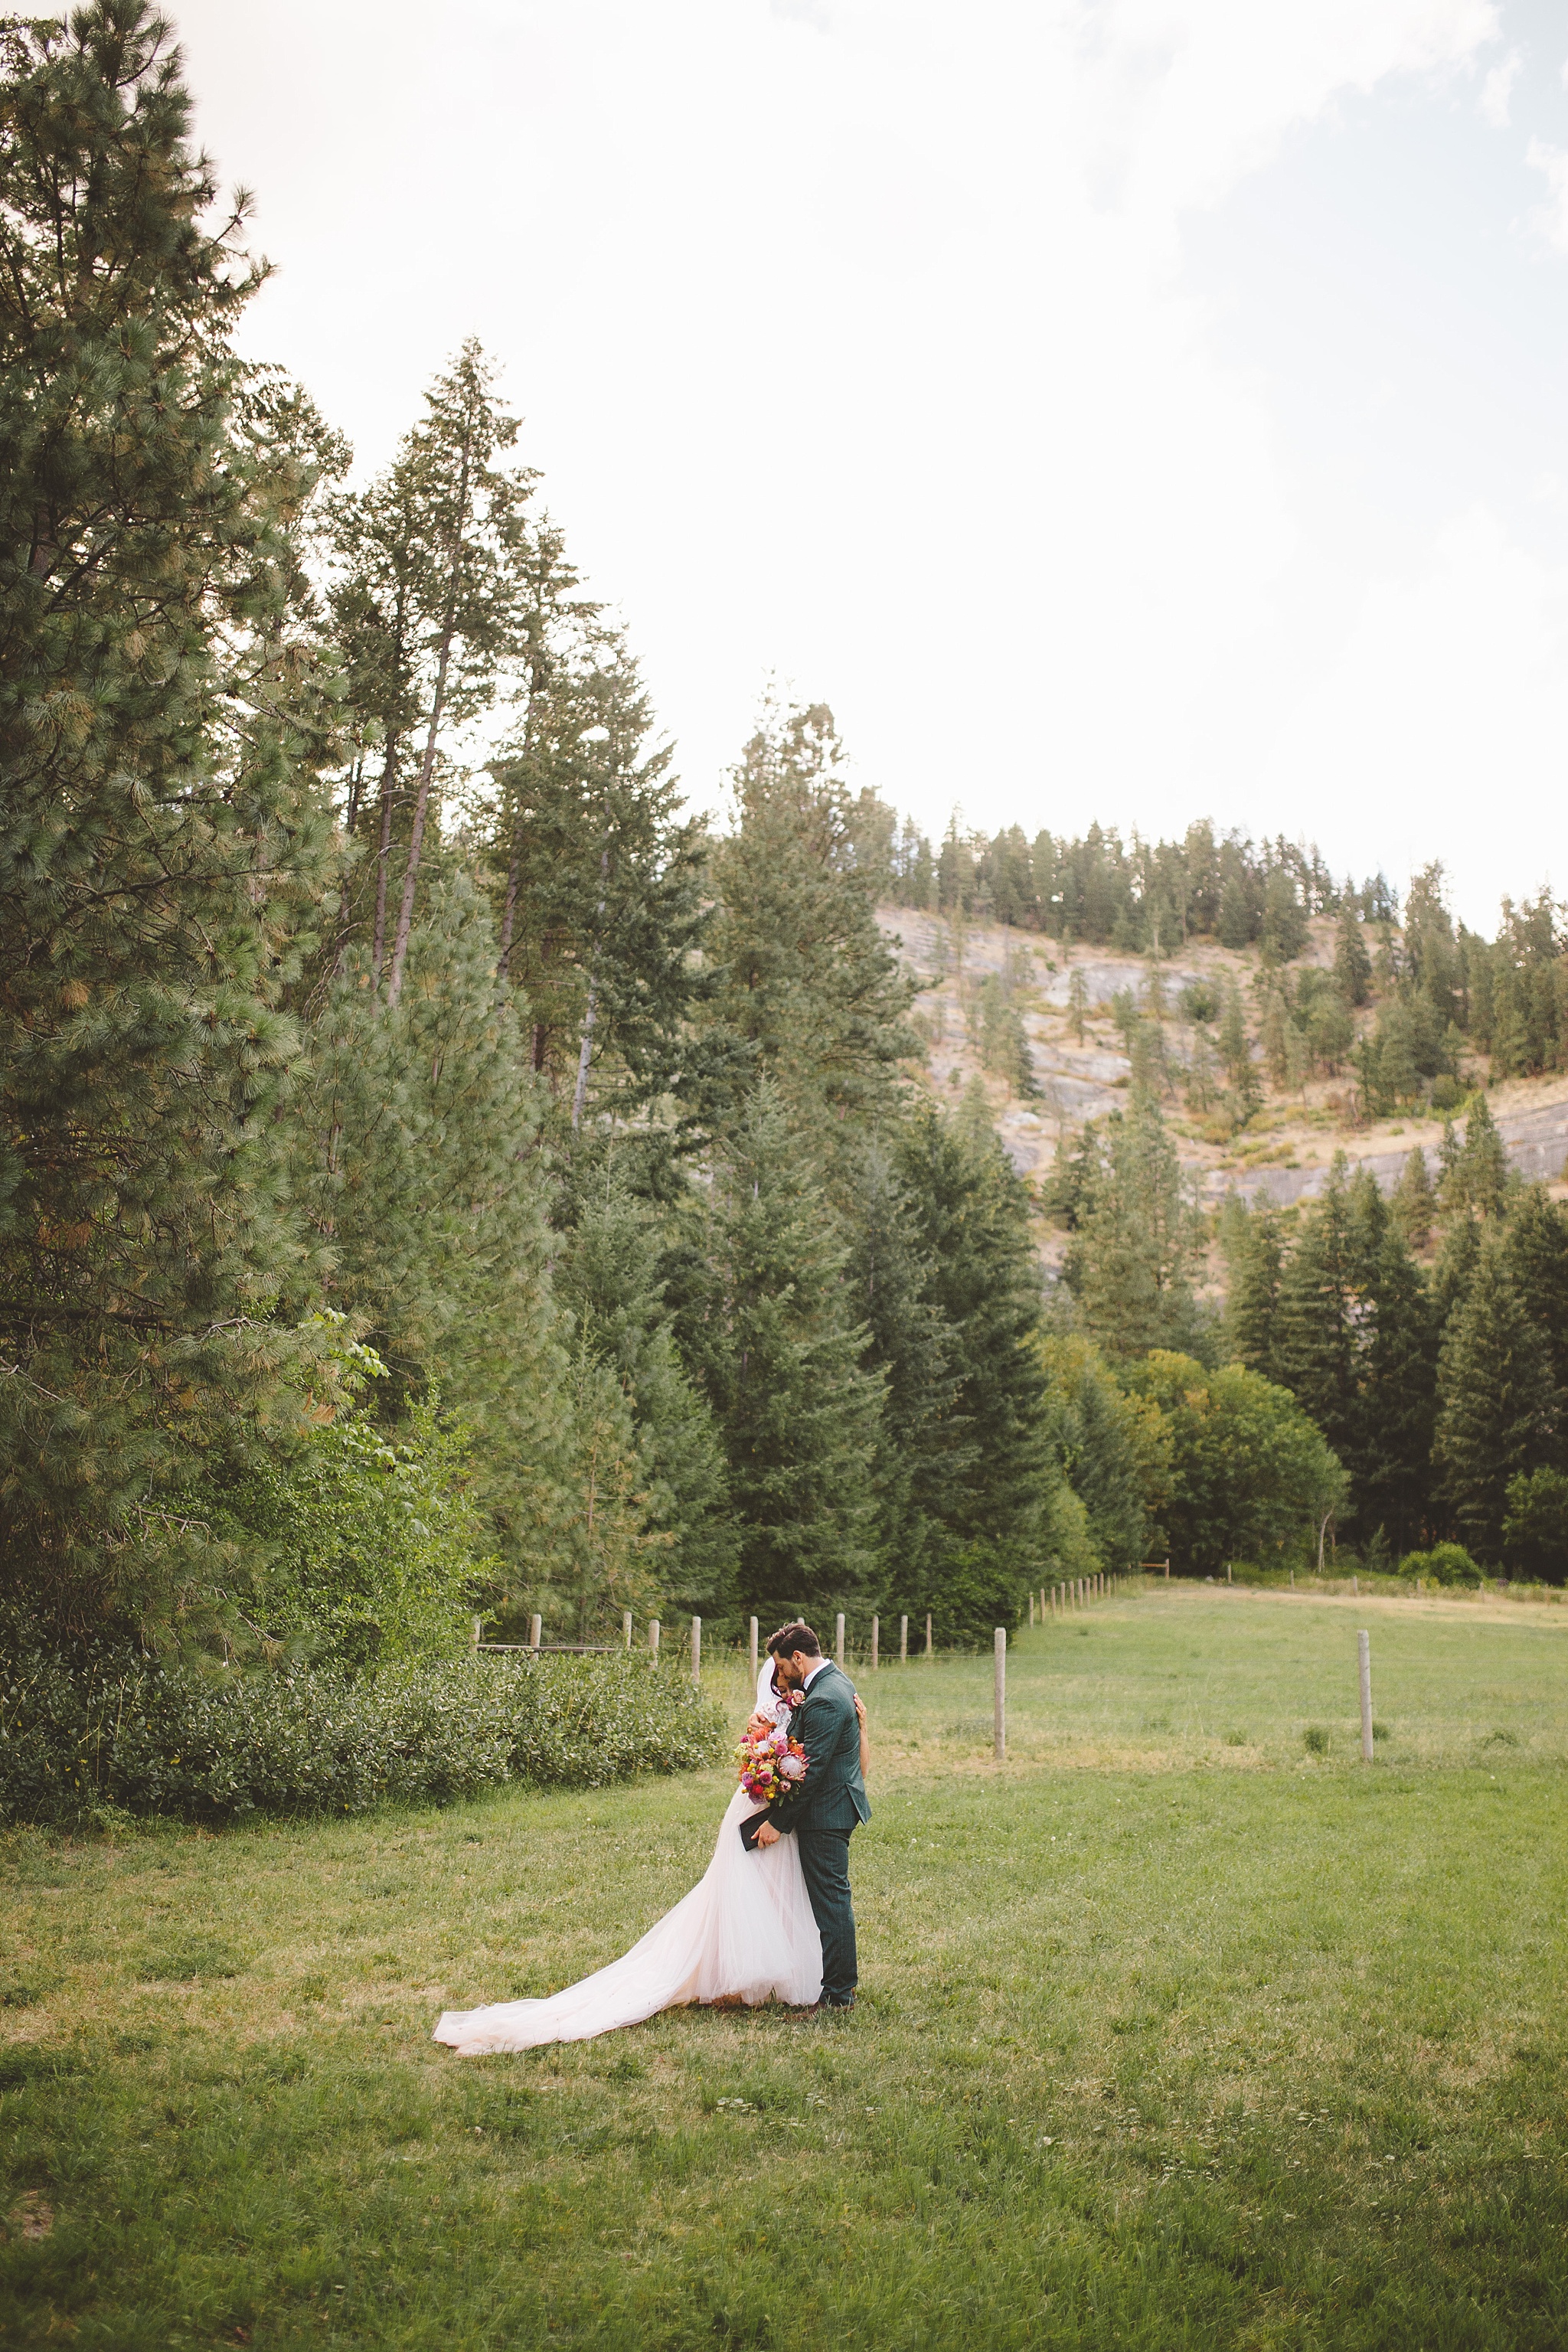 married in the woods of washington